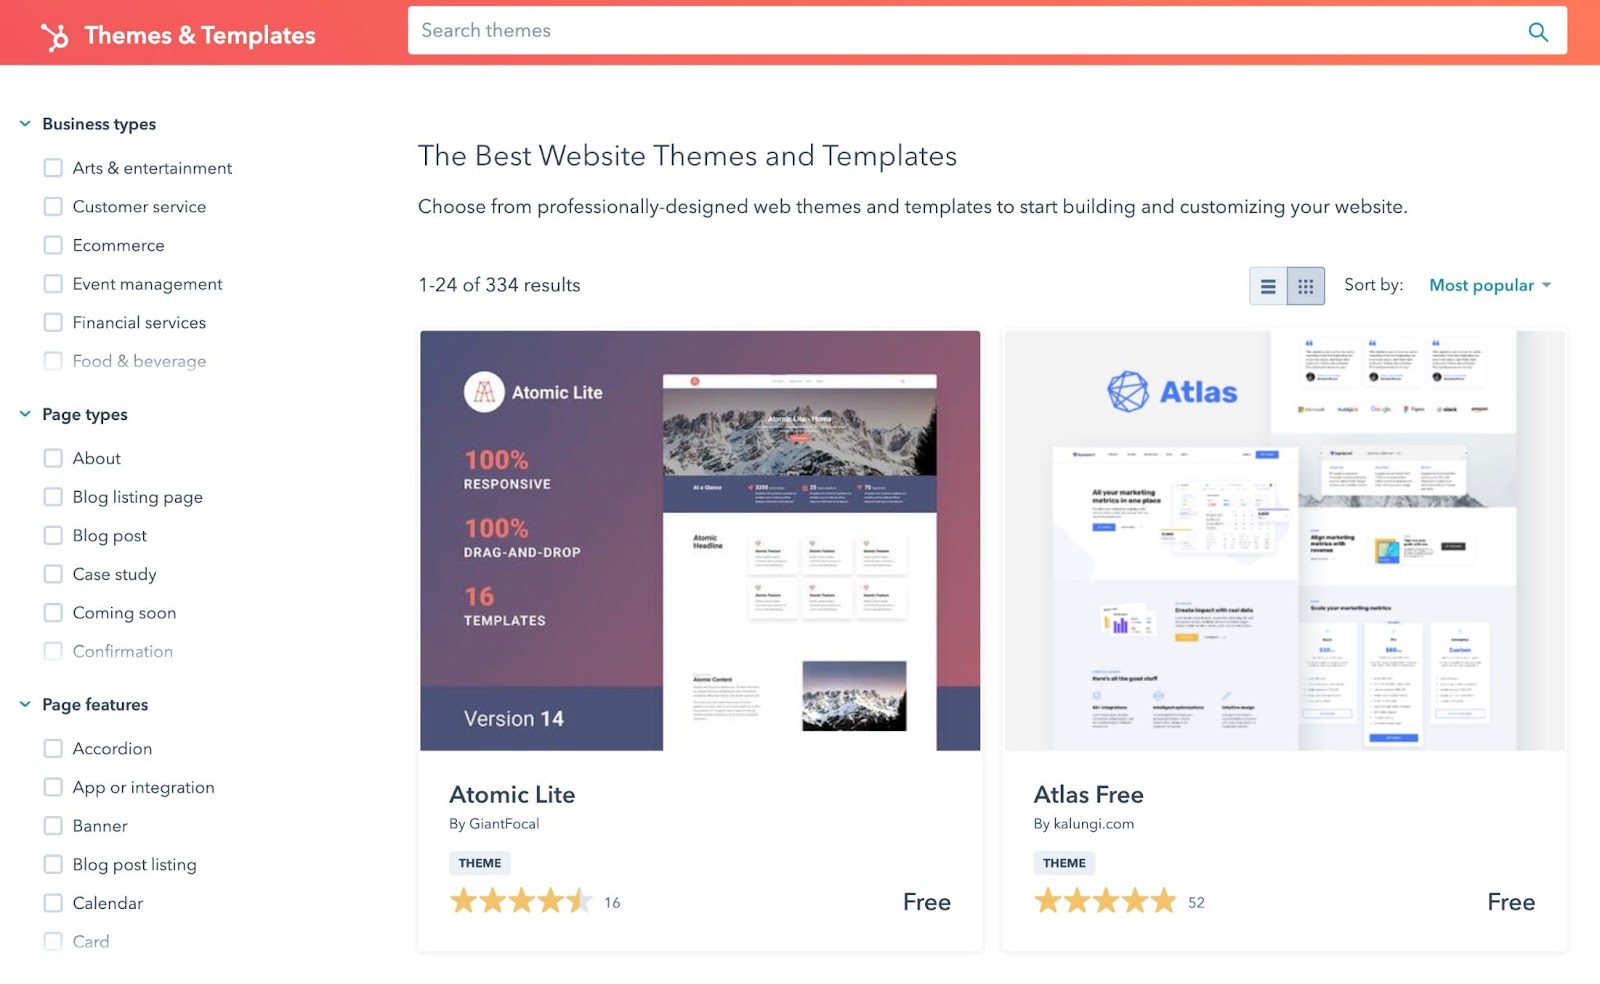 HubSpot themes and templates